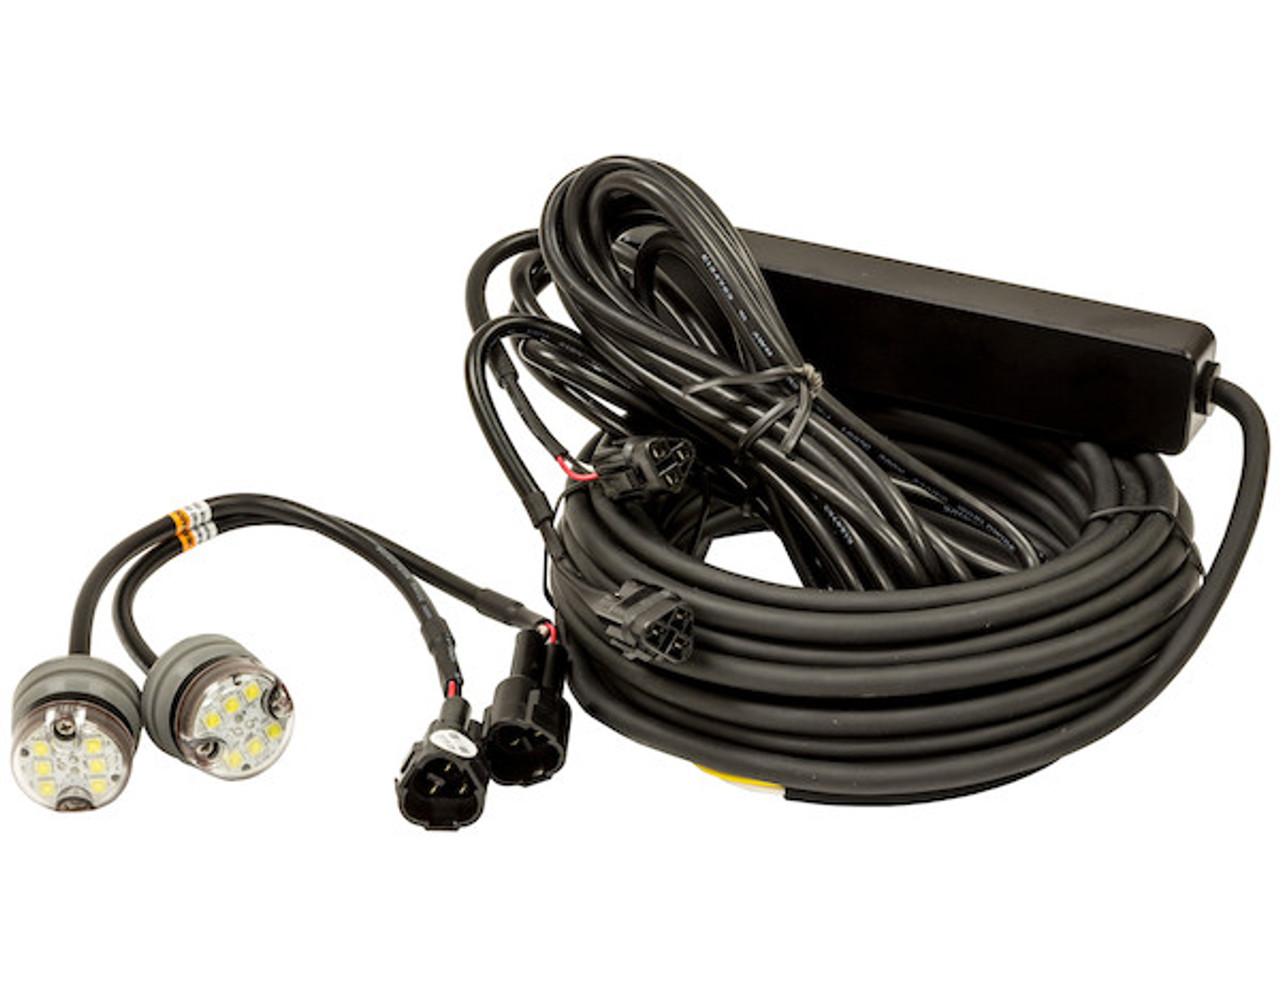 8891325 - 25 Foot Clear Push-On Hideaway Strobe Kit With In-Line Flashers With 6 LED